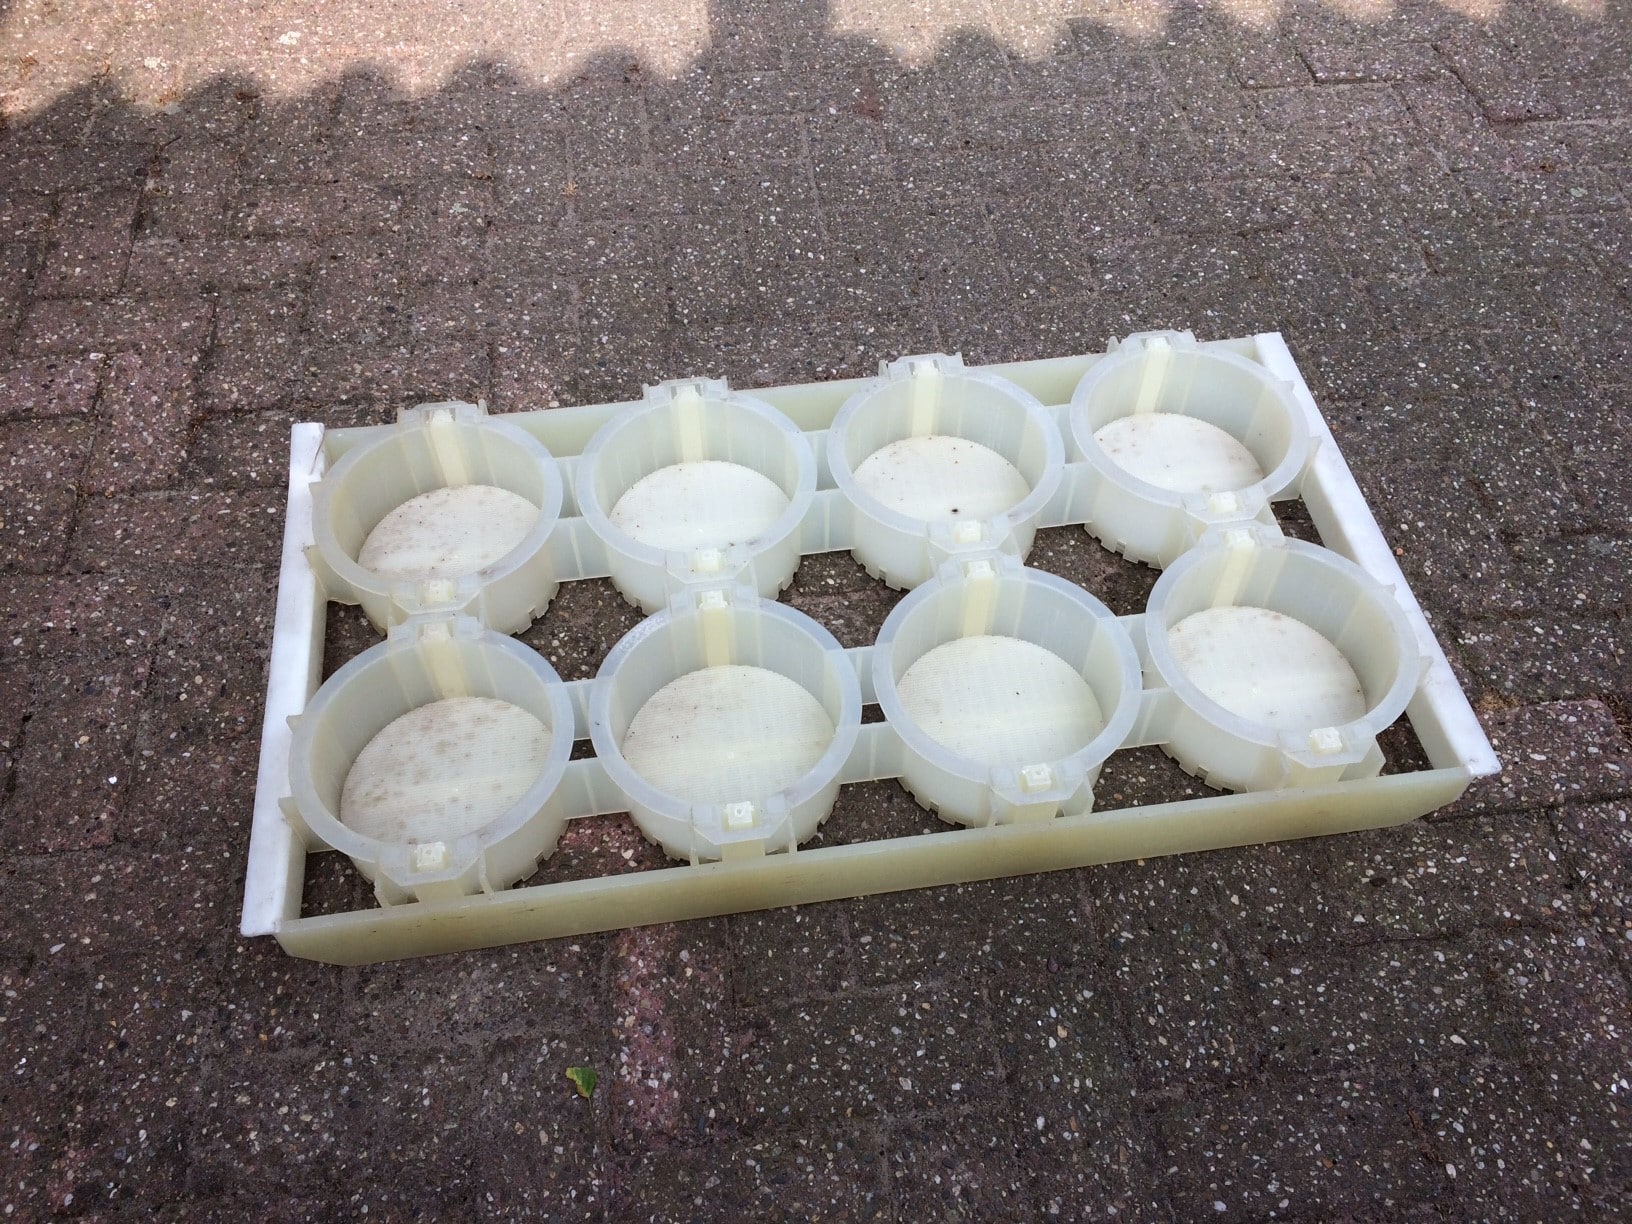 Cheese mould (8 round cheeses)